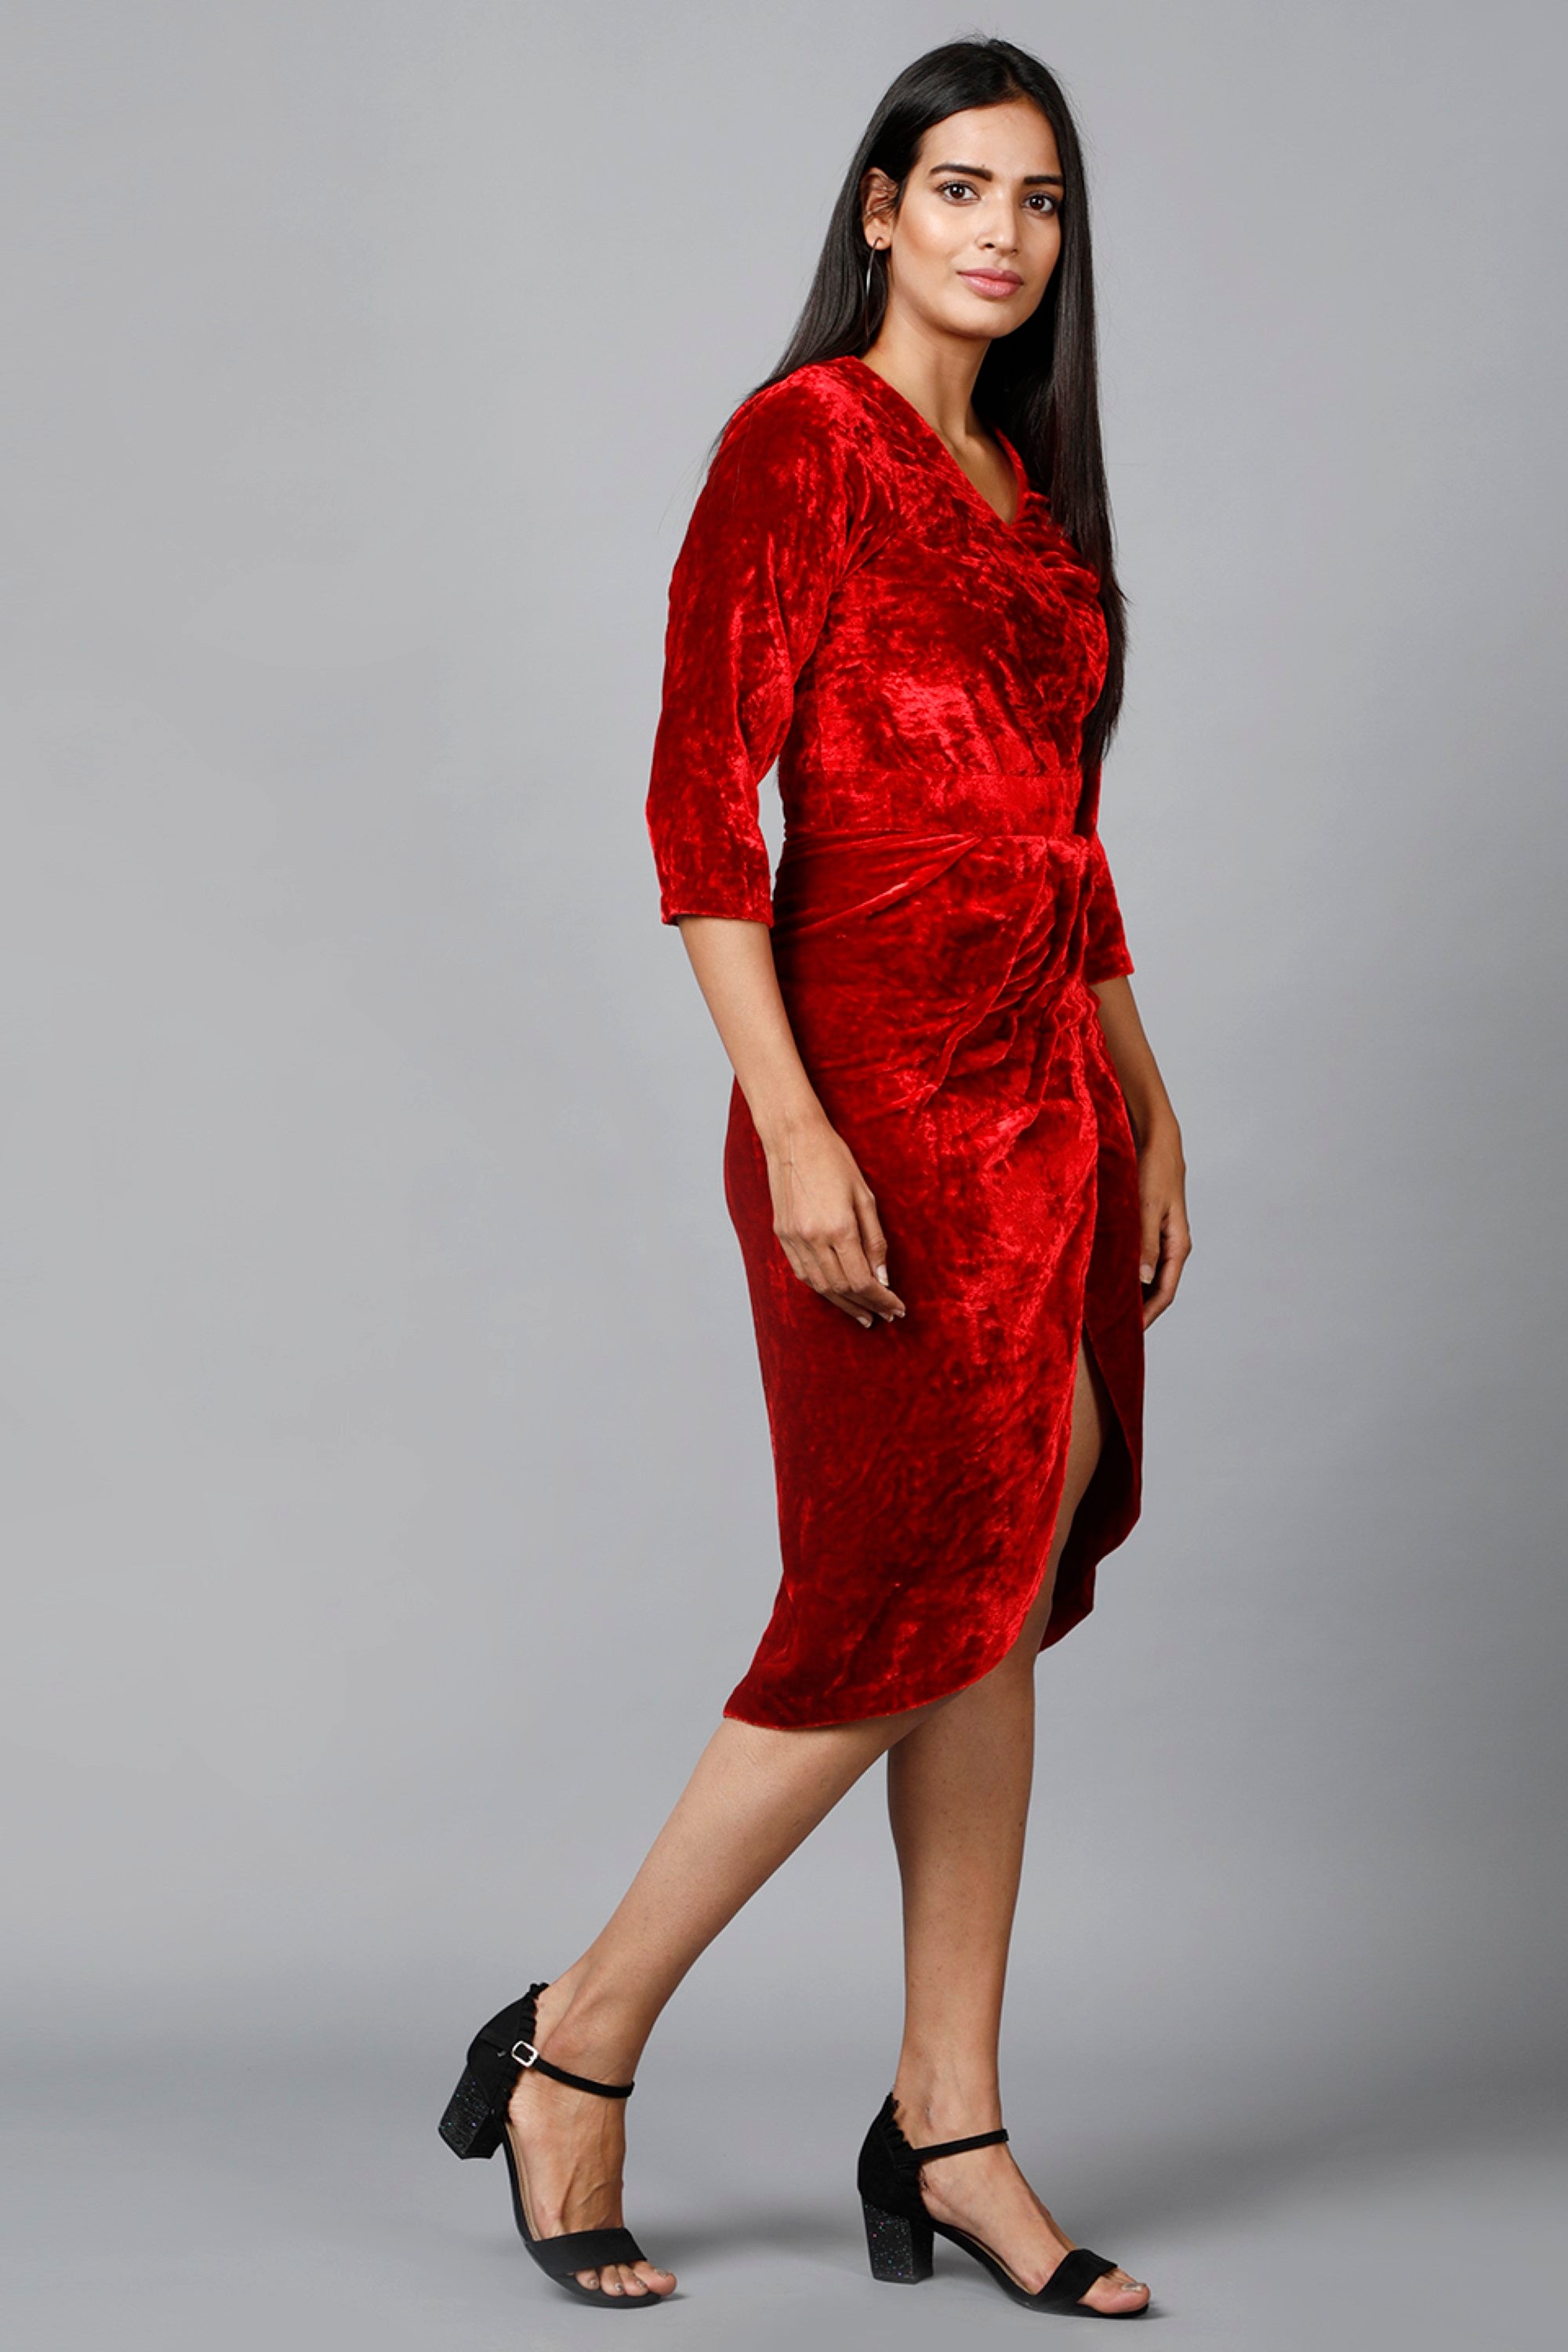 Women's Red Velvet Drape Party Dress - MIRACOLOS by Ruchi